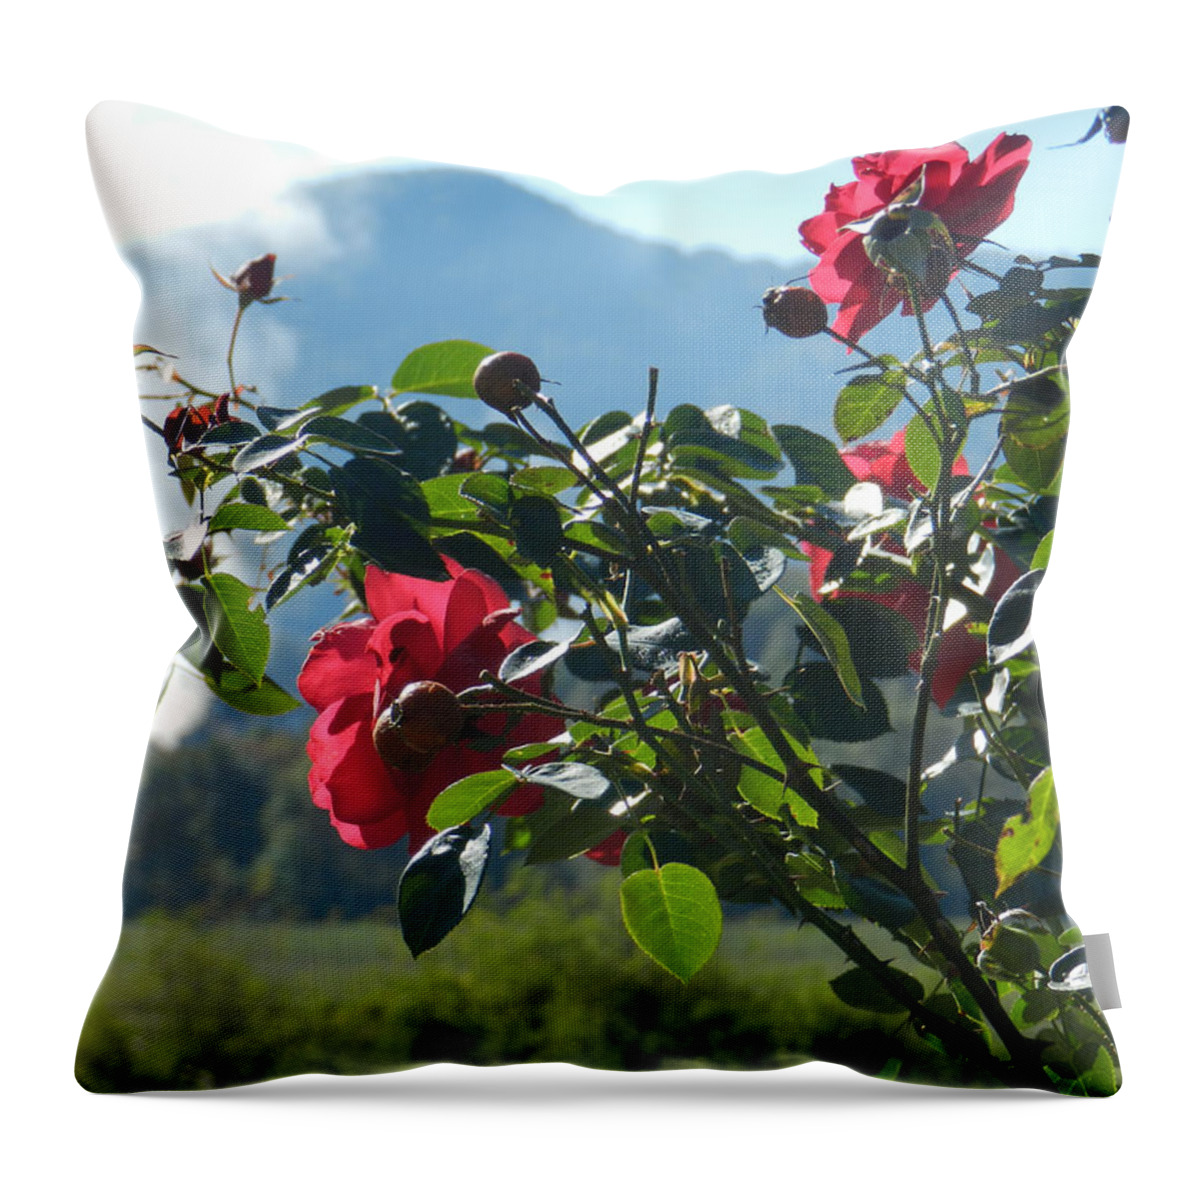 Roses Throw Pillow featuring the photograph Facing the Light by Deborah Ferree